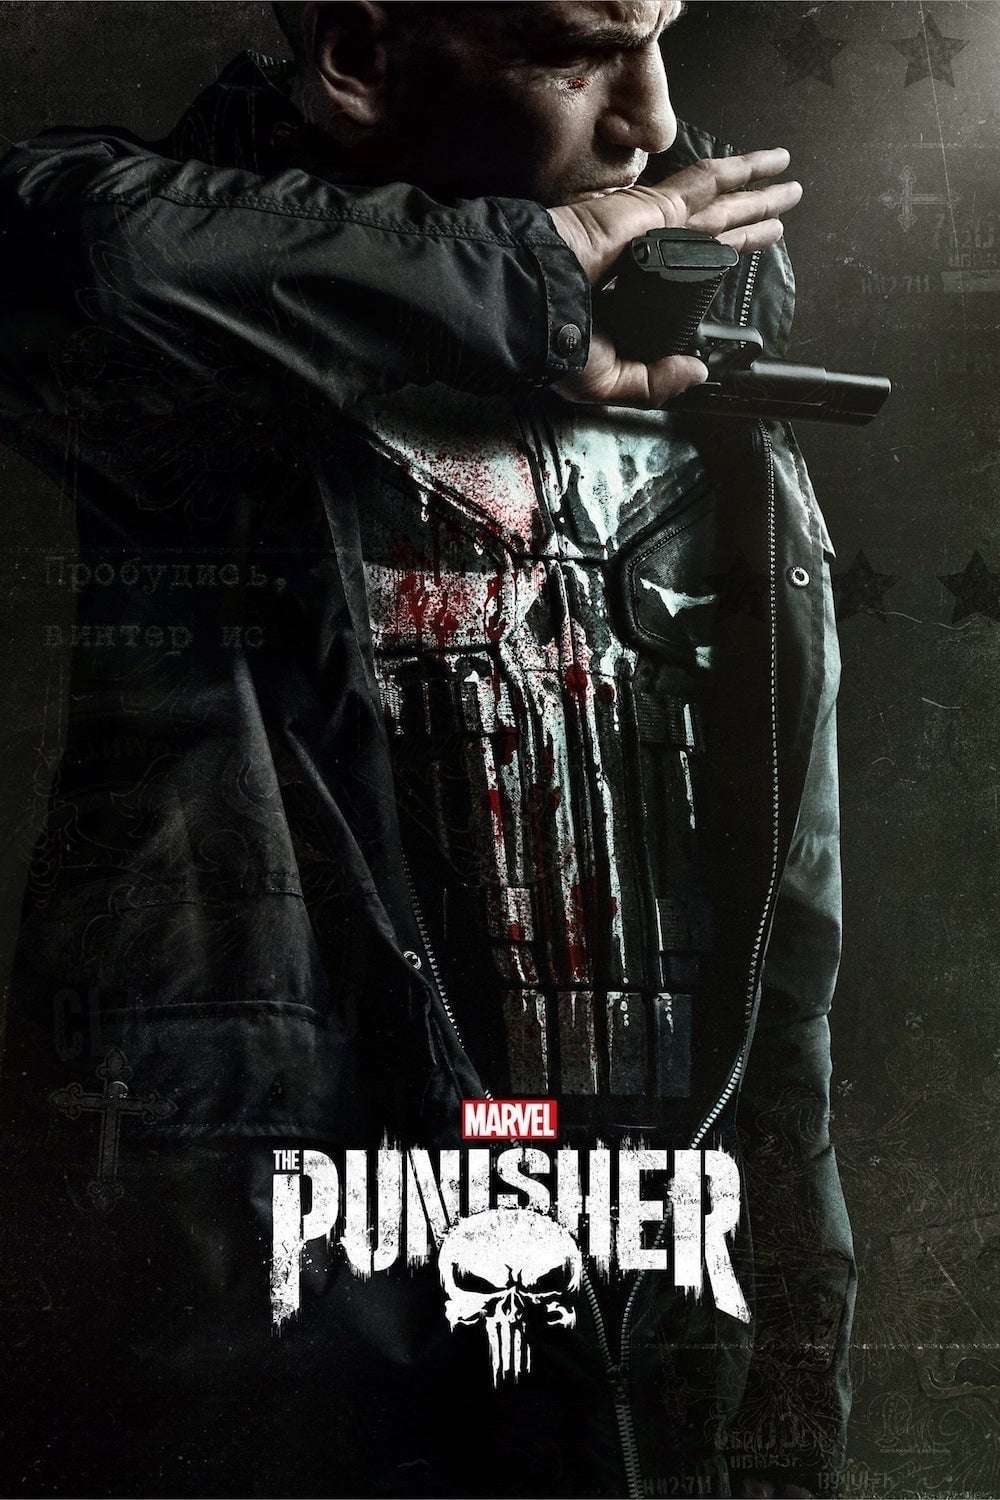 Marvel's The Punisher TV Shows About Vigilante